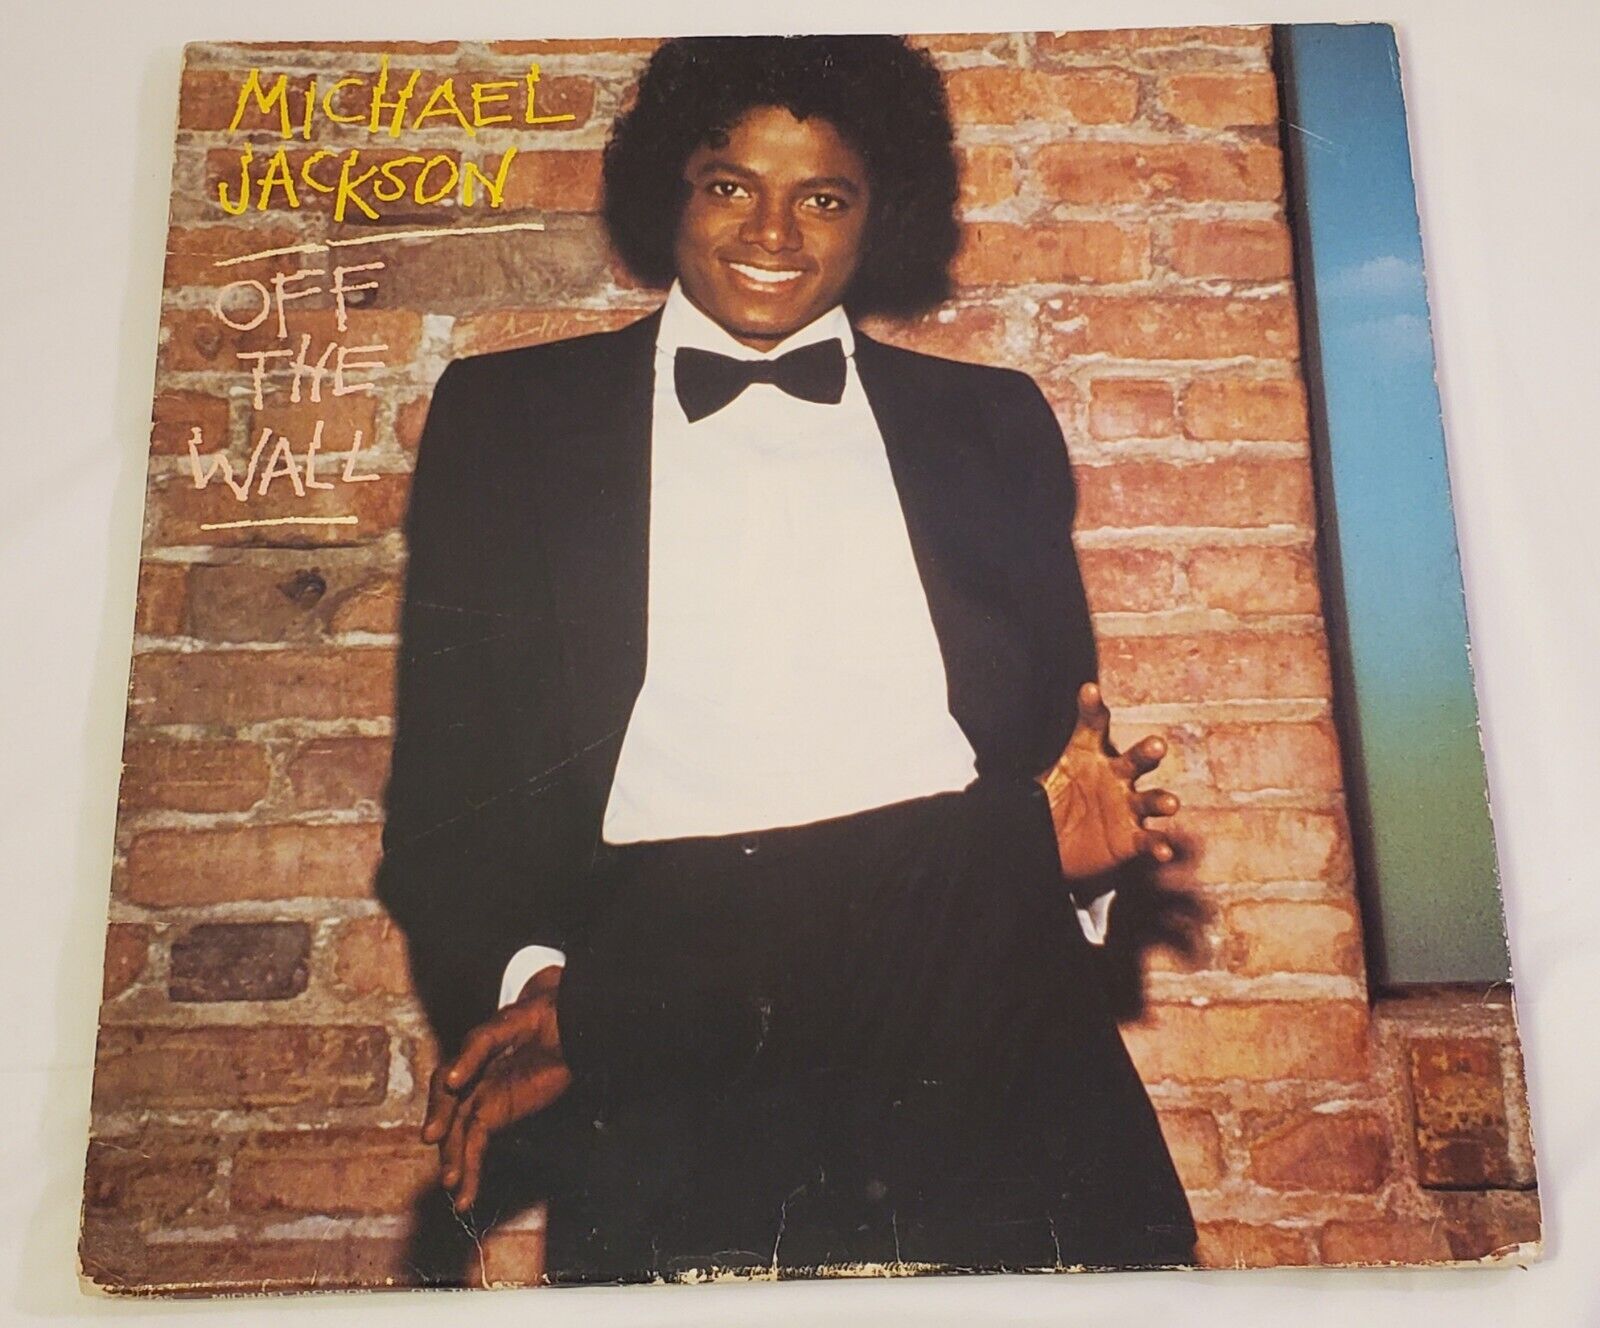 Michael Jackson Off the Wall LP Vinyl Record 1978 JACKET ONLY NO RECORD